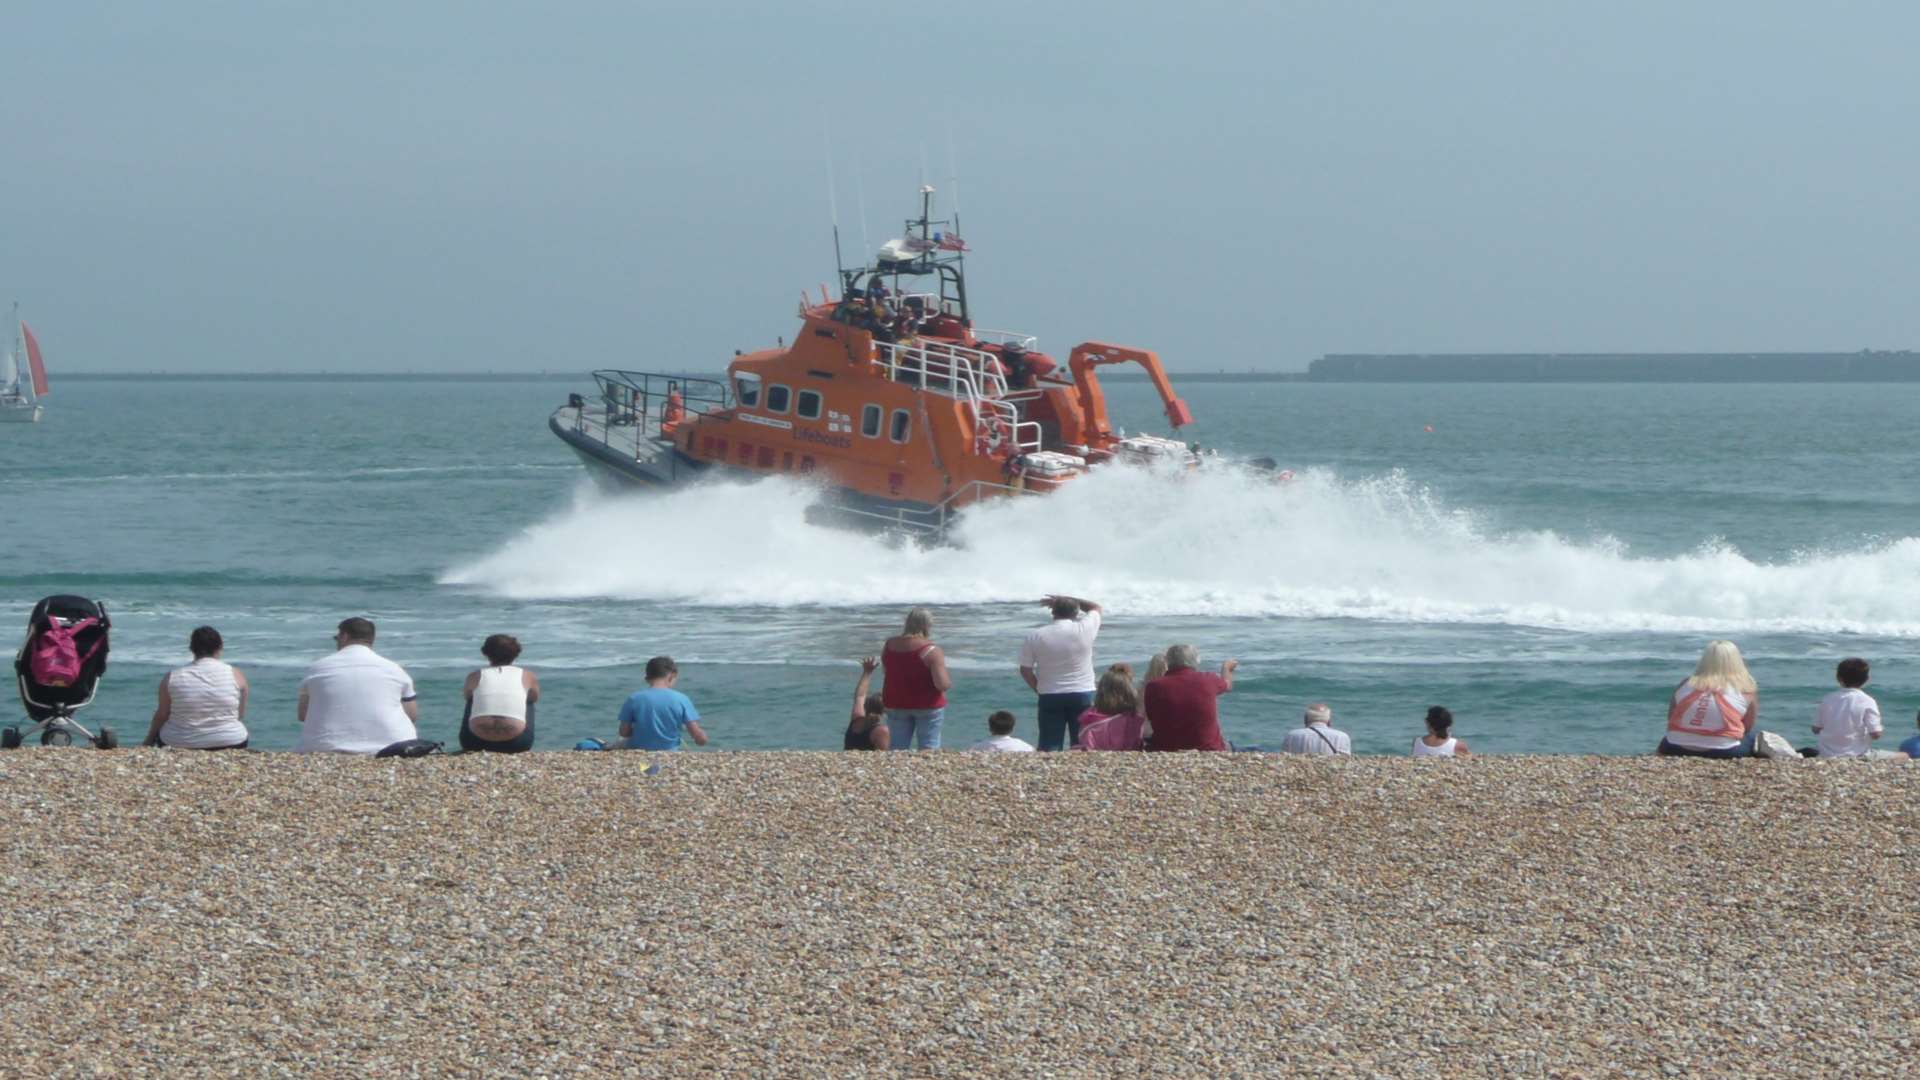 Dover lifeboat at the regatta